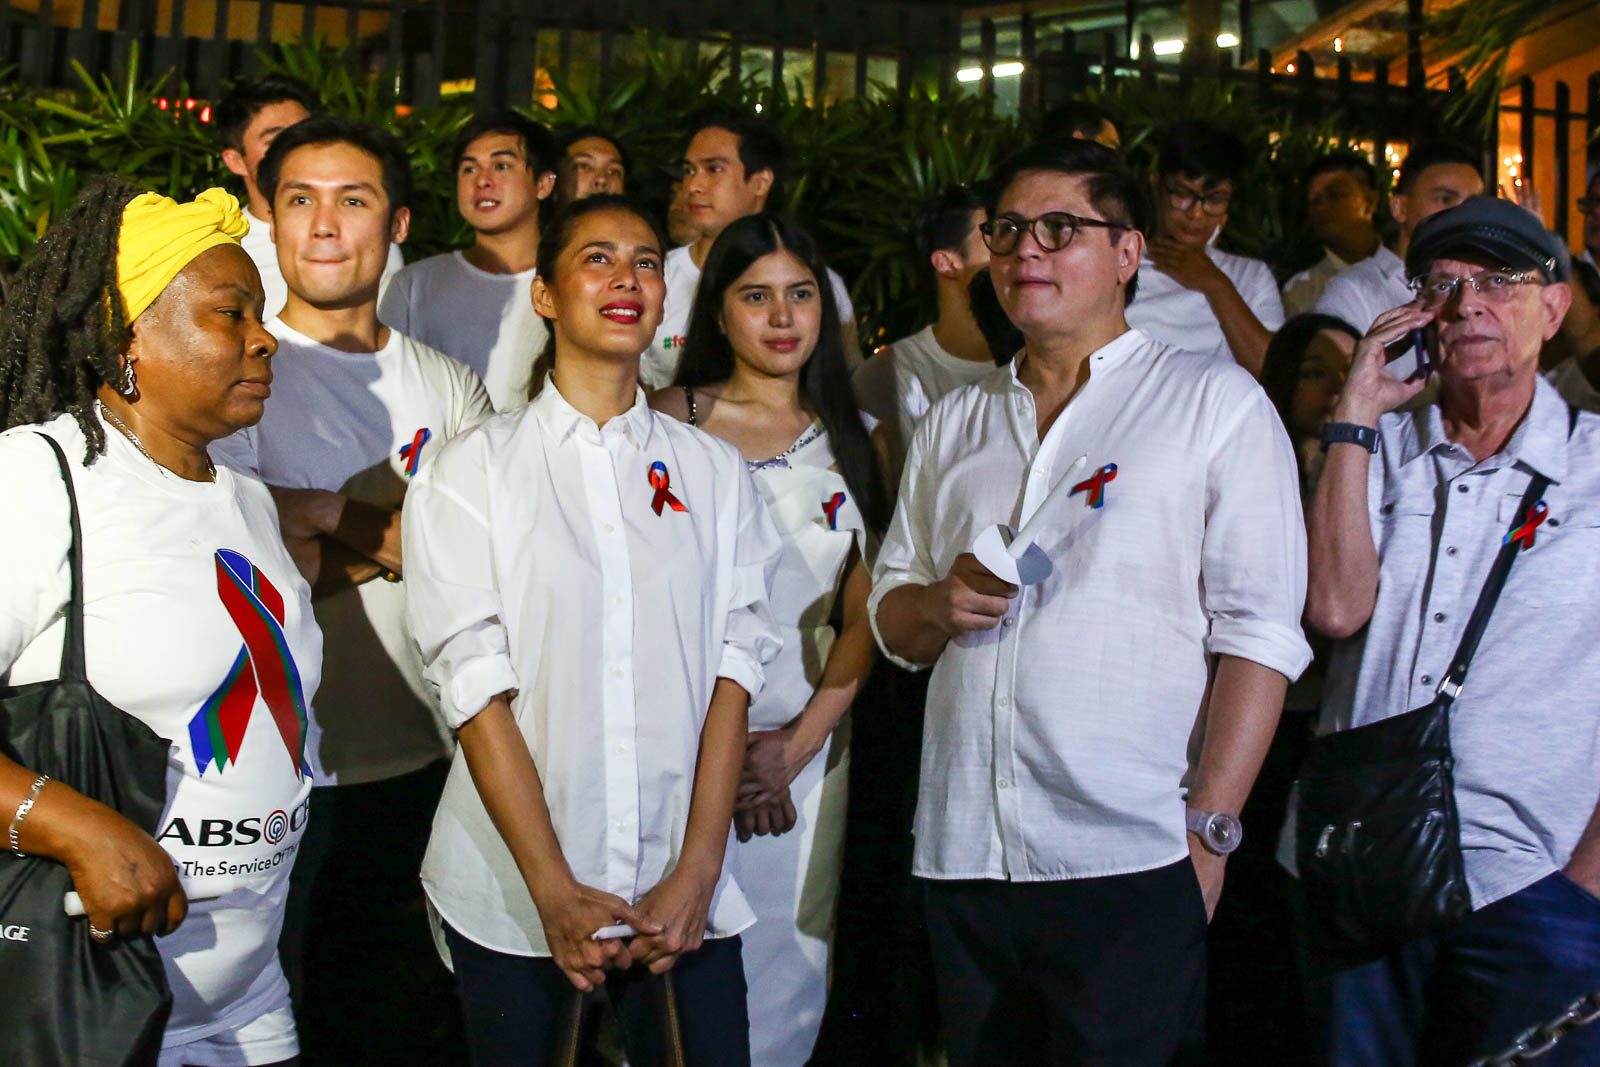 SOLIDARITY. The cast of 'Ang Probinsyano' joins employees and supporters of ABS-CBN on February 21, 2020, to protest for the renewal of the media giant's franchise. Photo by Jire Carreon/Rappler 